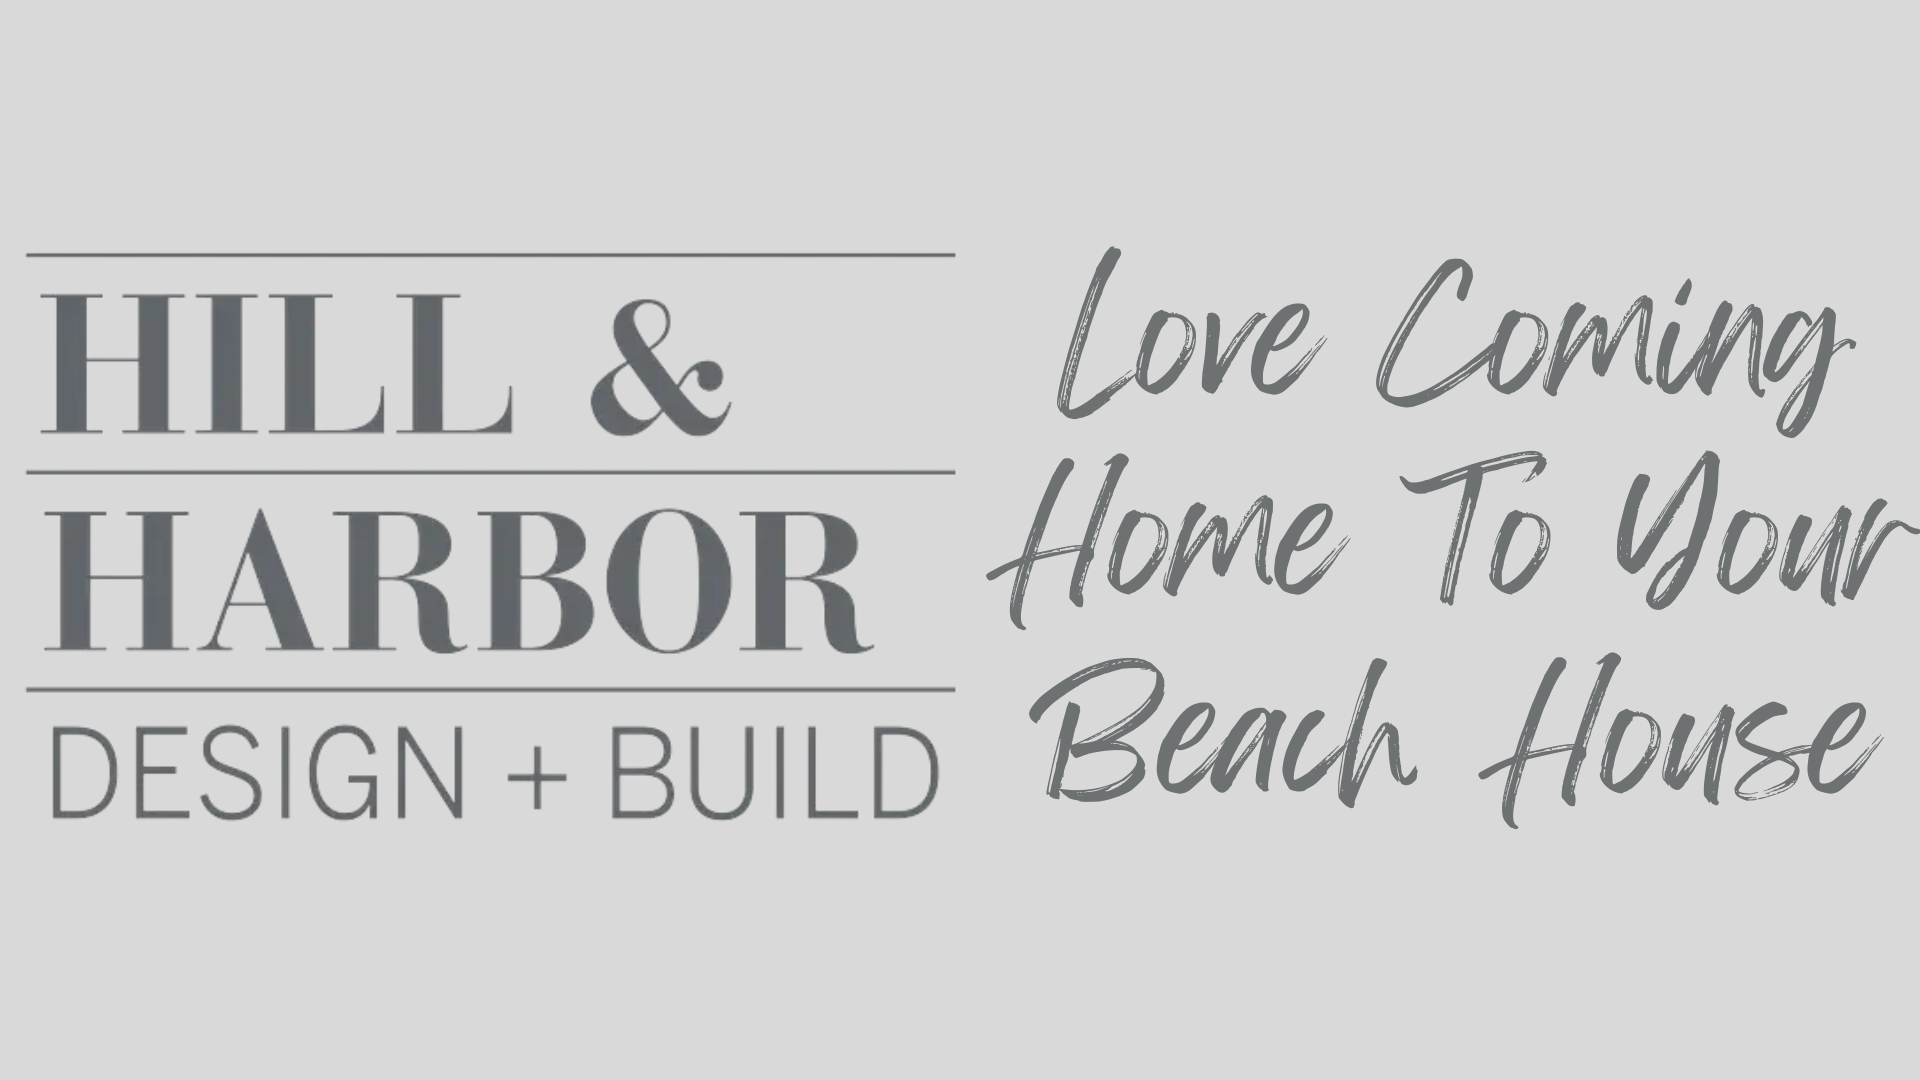 Hill & Harbor Design + Build Can Help You Love Your Beach House!